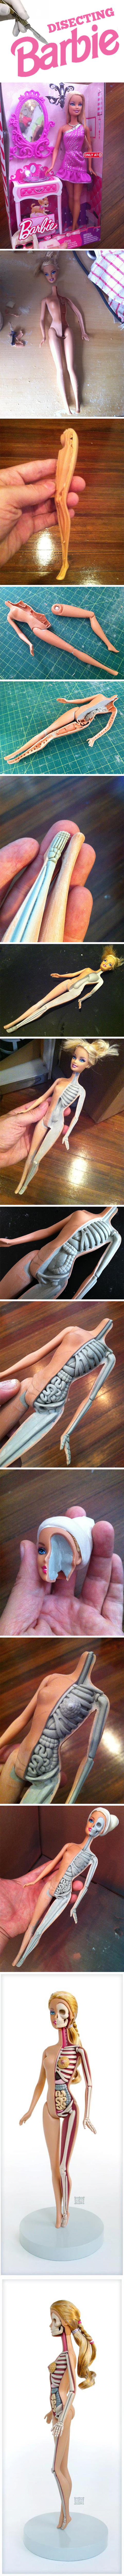 Disecting Barbie.